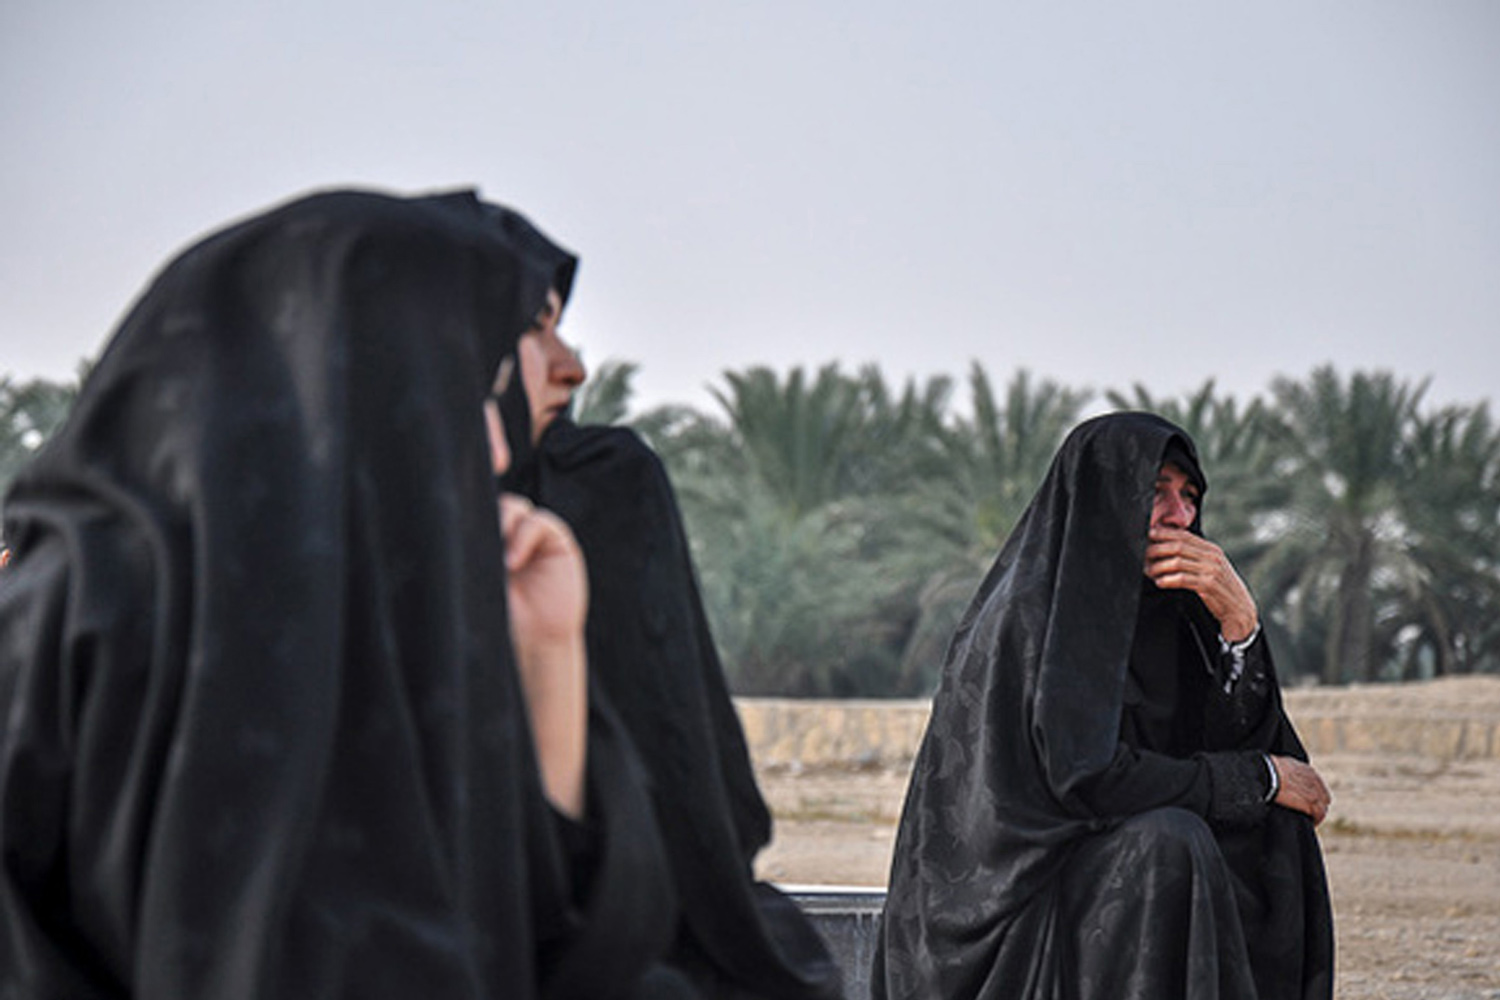 Women react as they attend the funeral of earthquake victims in the earthquake-stricken town of Khormoj in Bushehr province